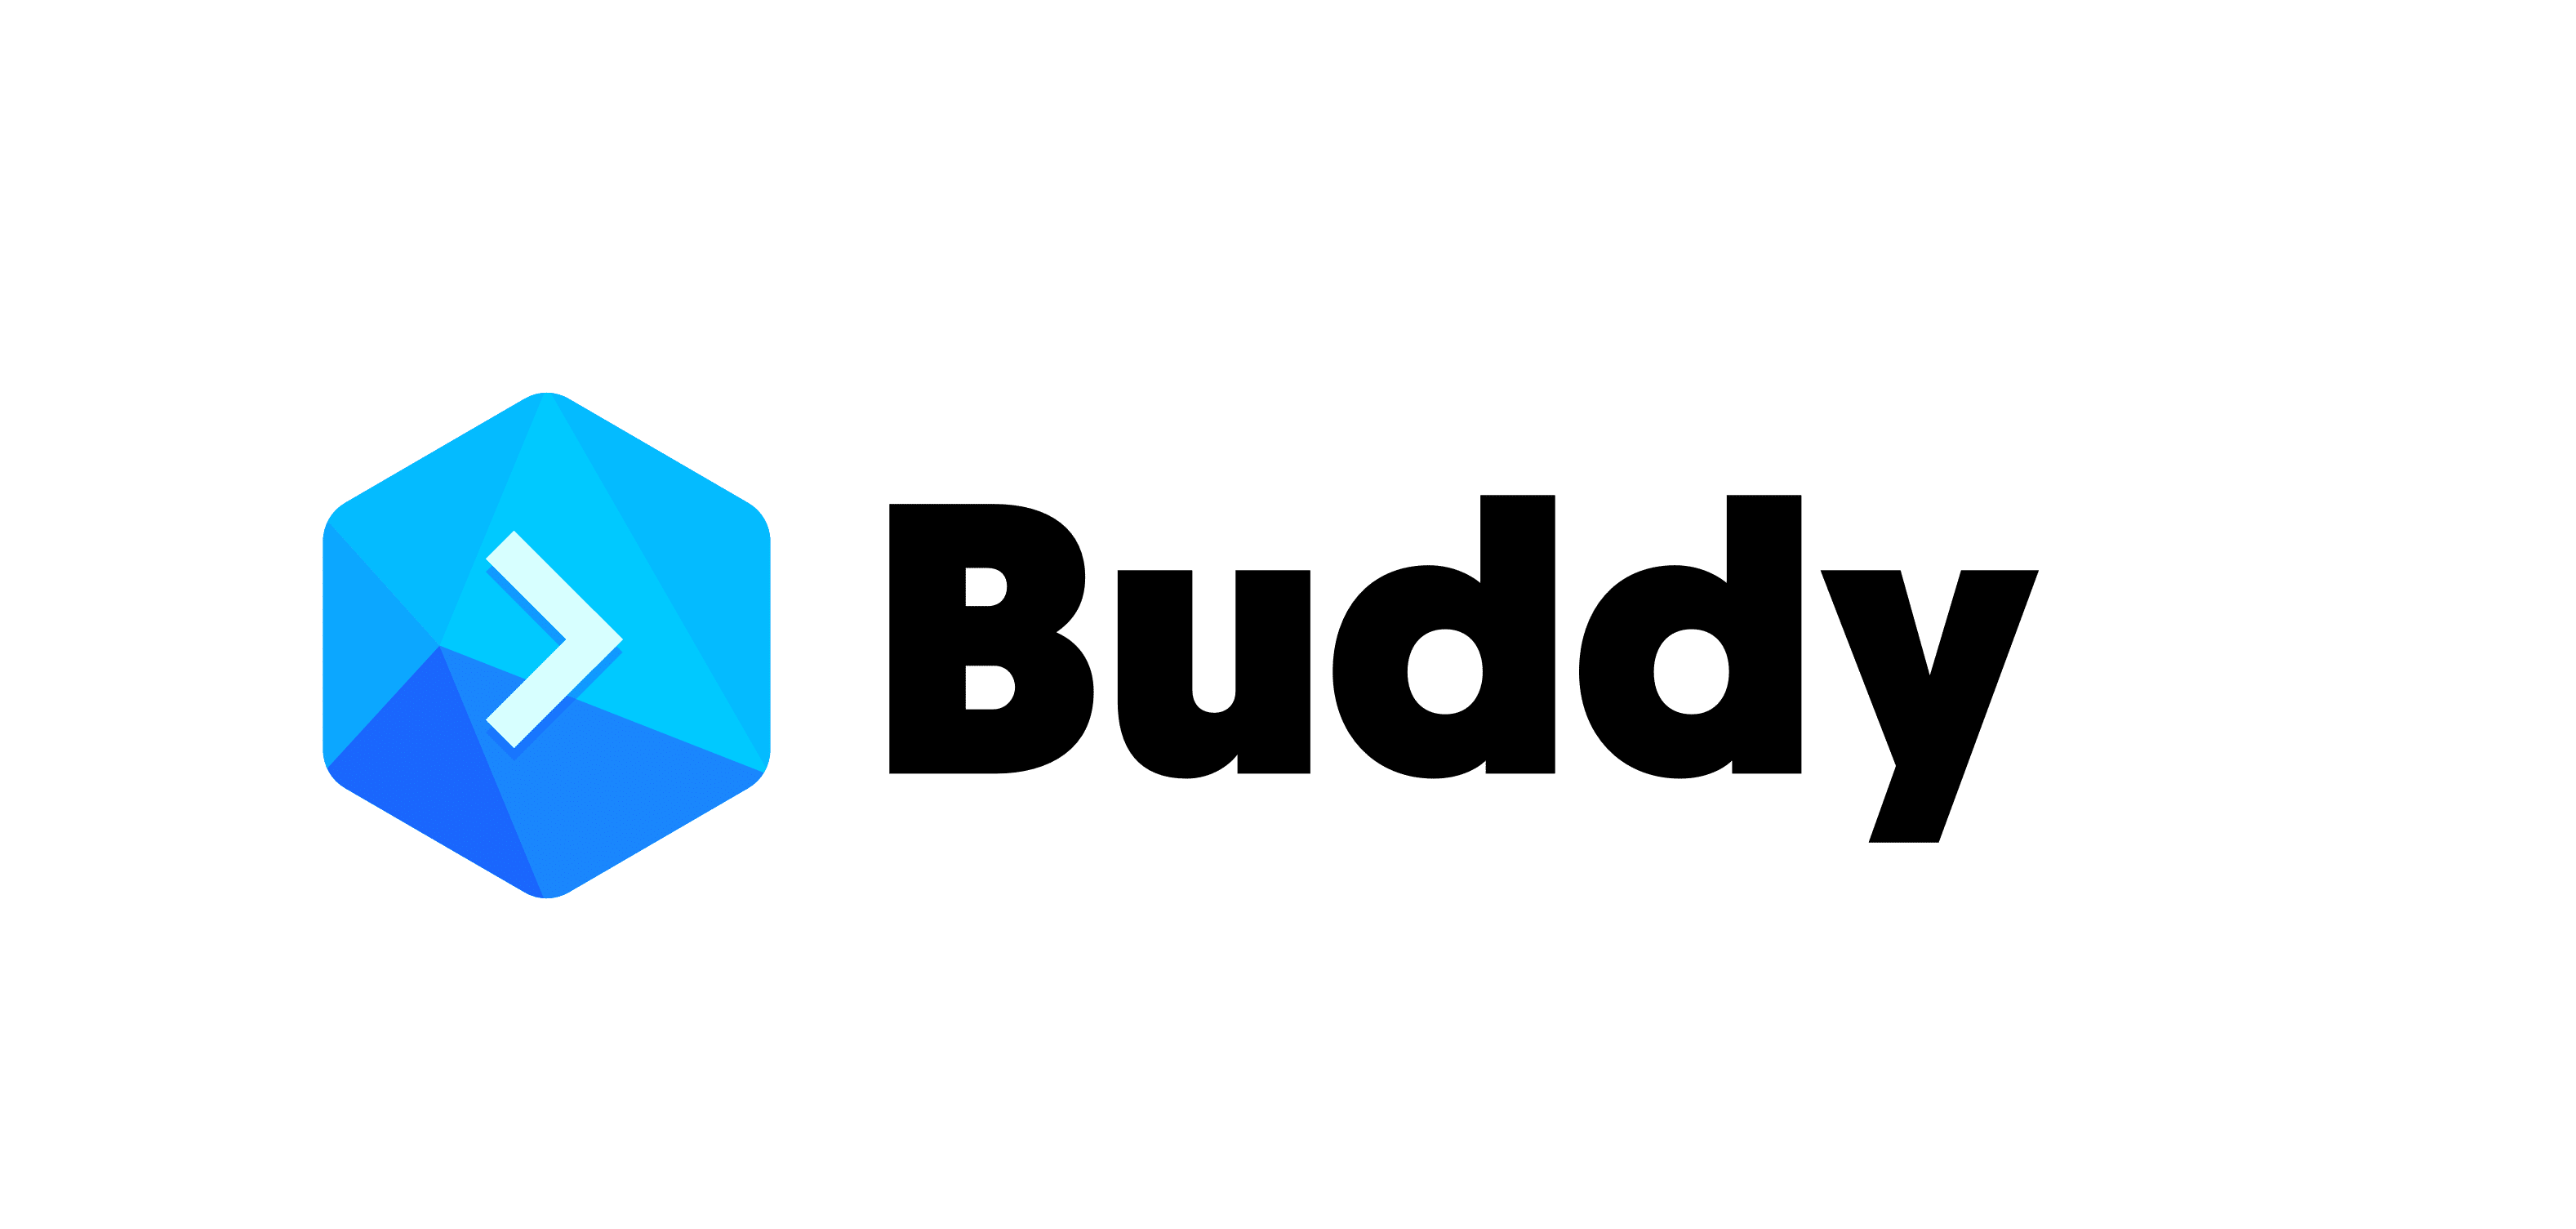 Buddy Logo PNG vector in SVG, PDF, AI, CDR format